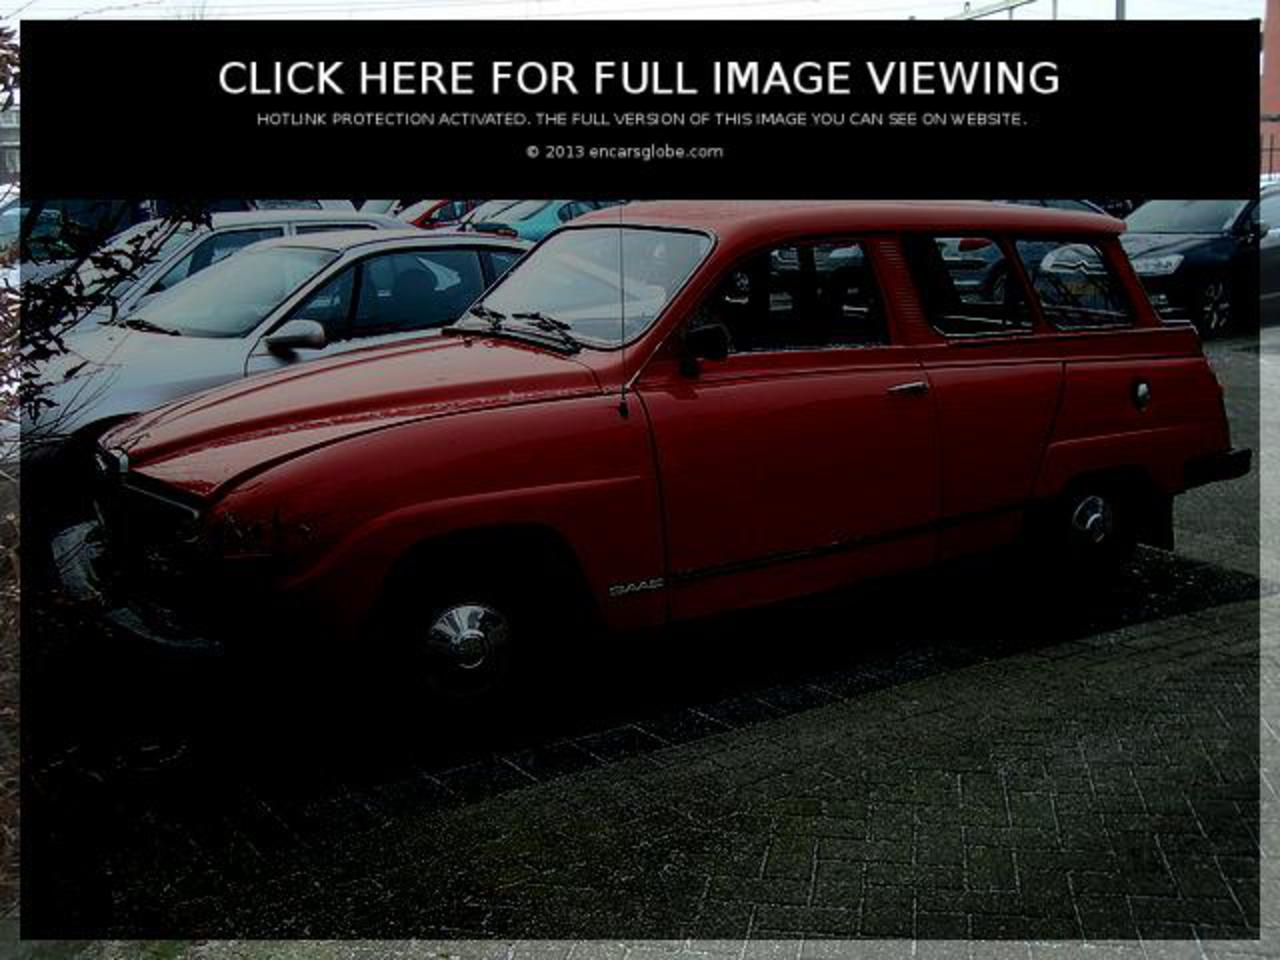 Saab 95 L V4: Photo gallery, complete information about model ...